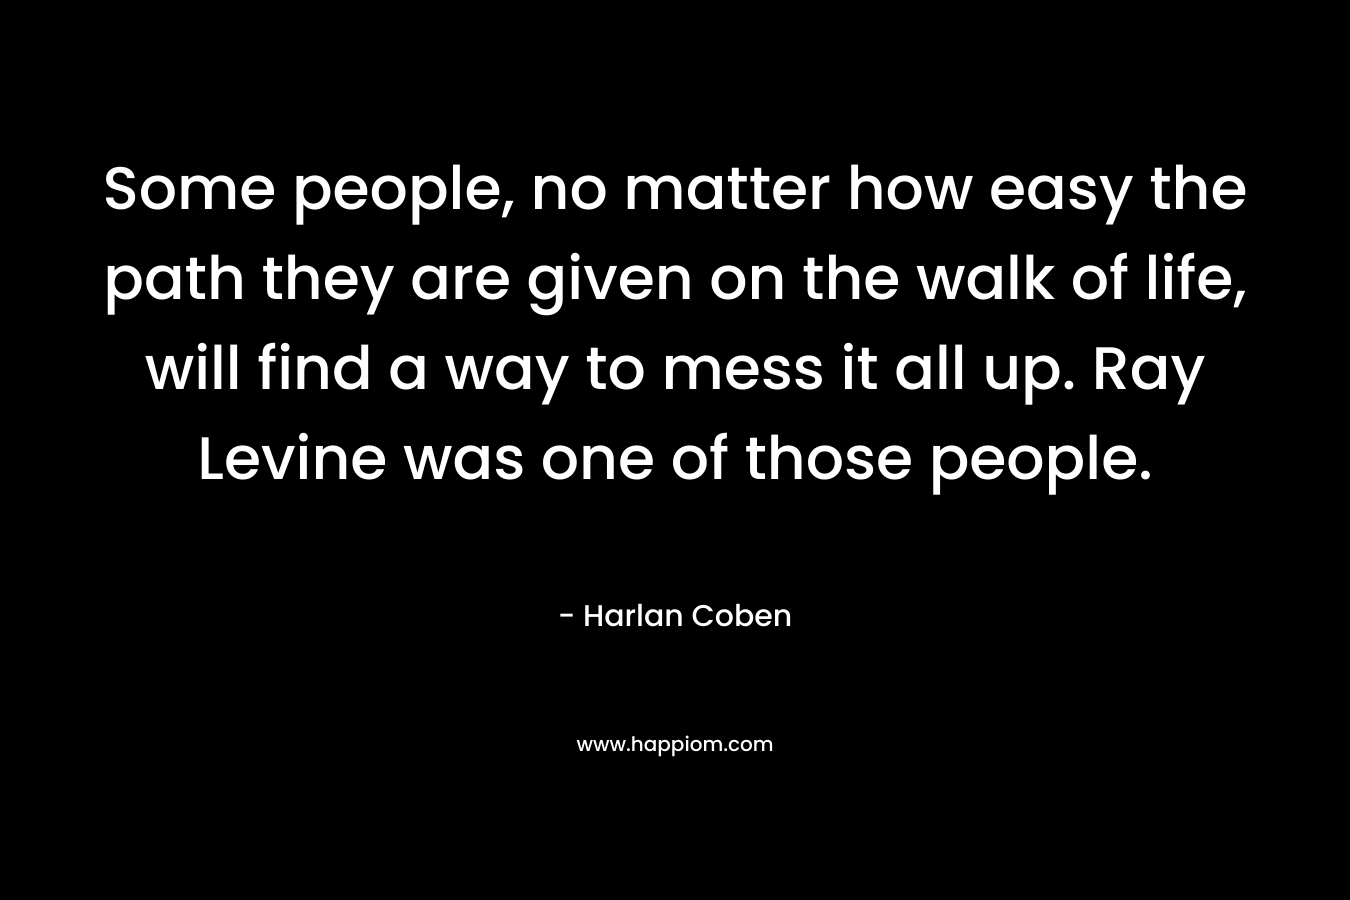 Some people, no matter how easy the path they are given on the walk of life, will find a way to mess it all up. Ray Levine was one of those people. – Harlan Coben